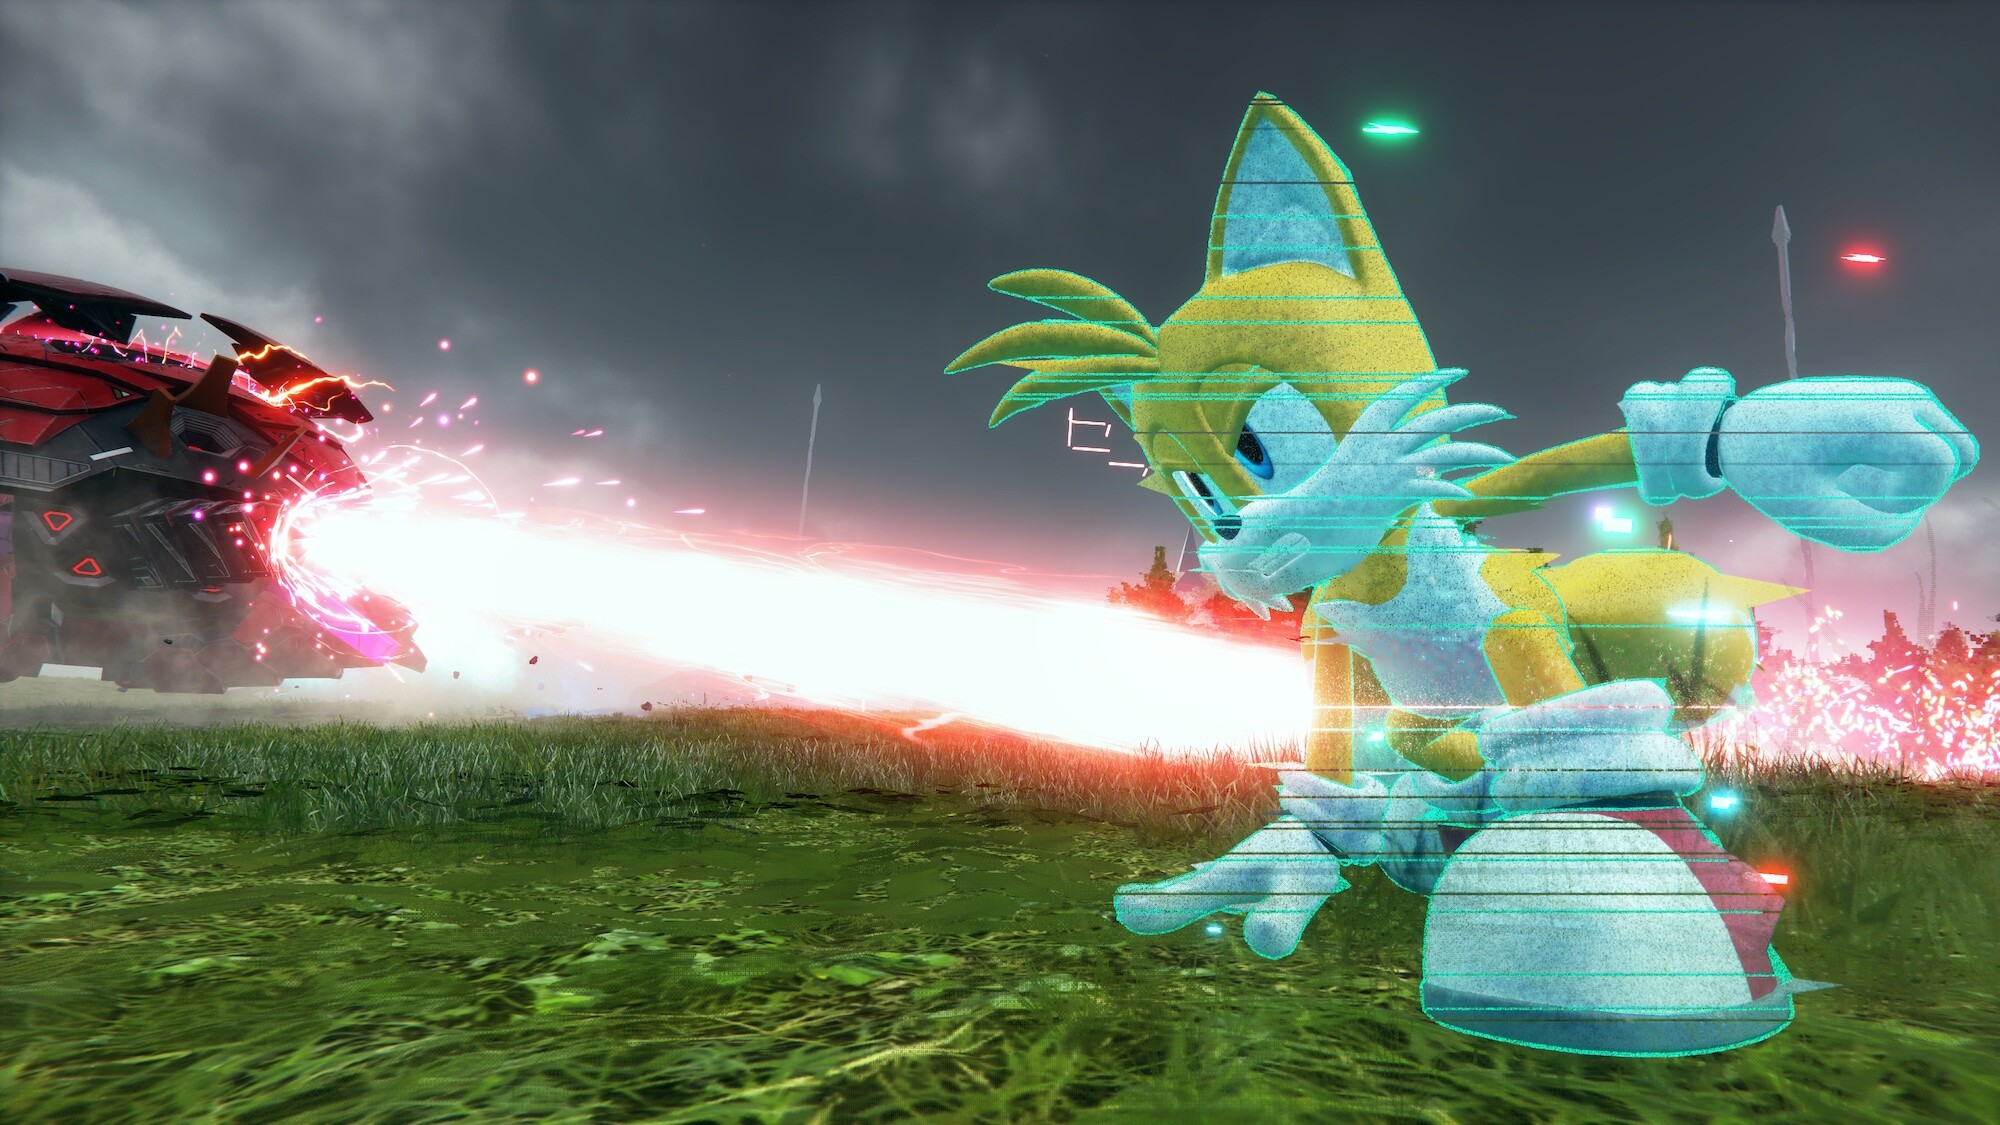 The Final Horizon Update – Available September 28! - Sonic the